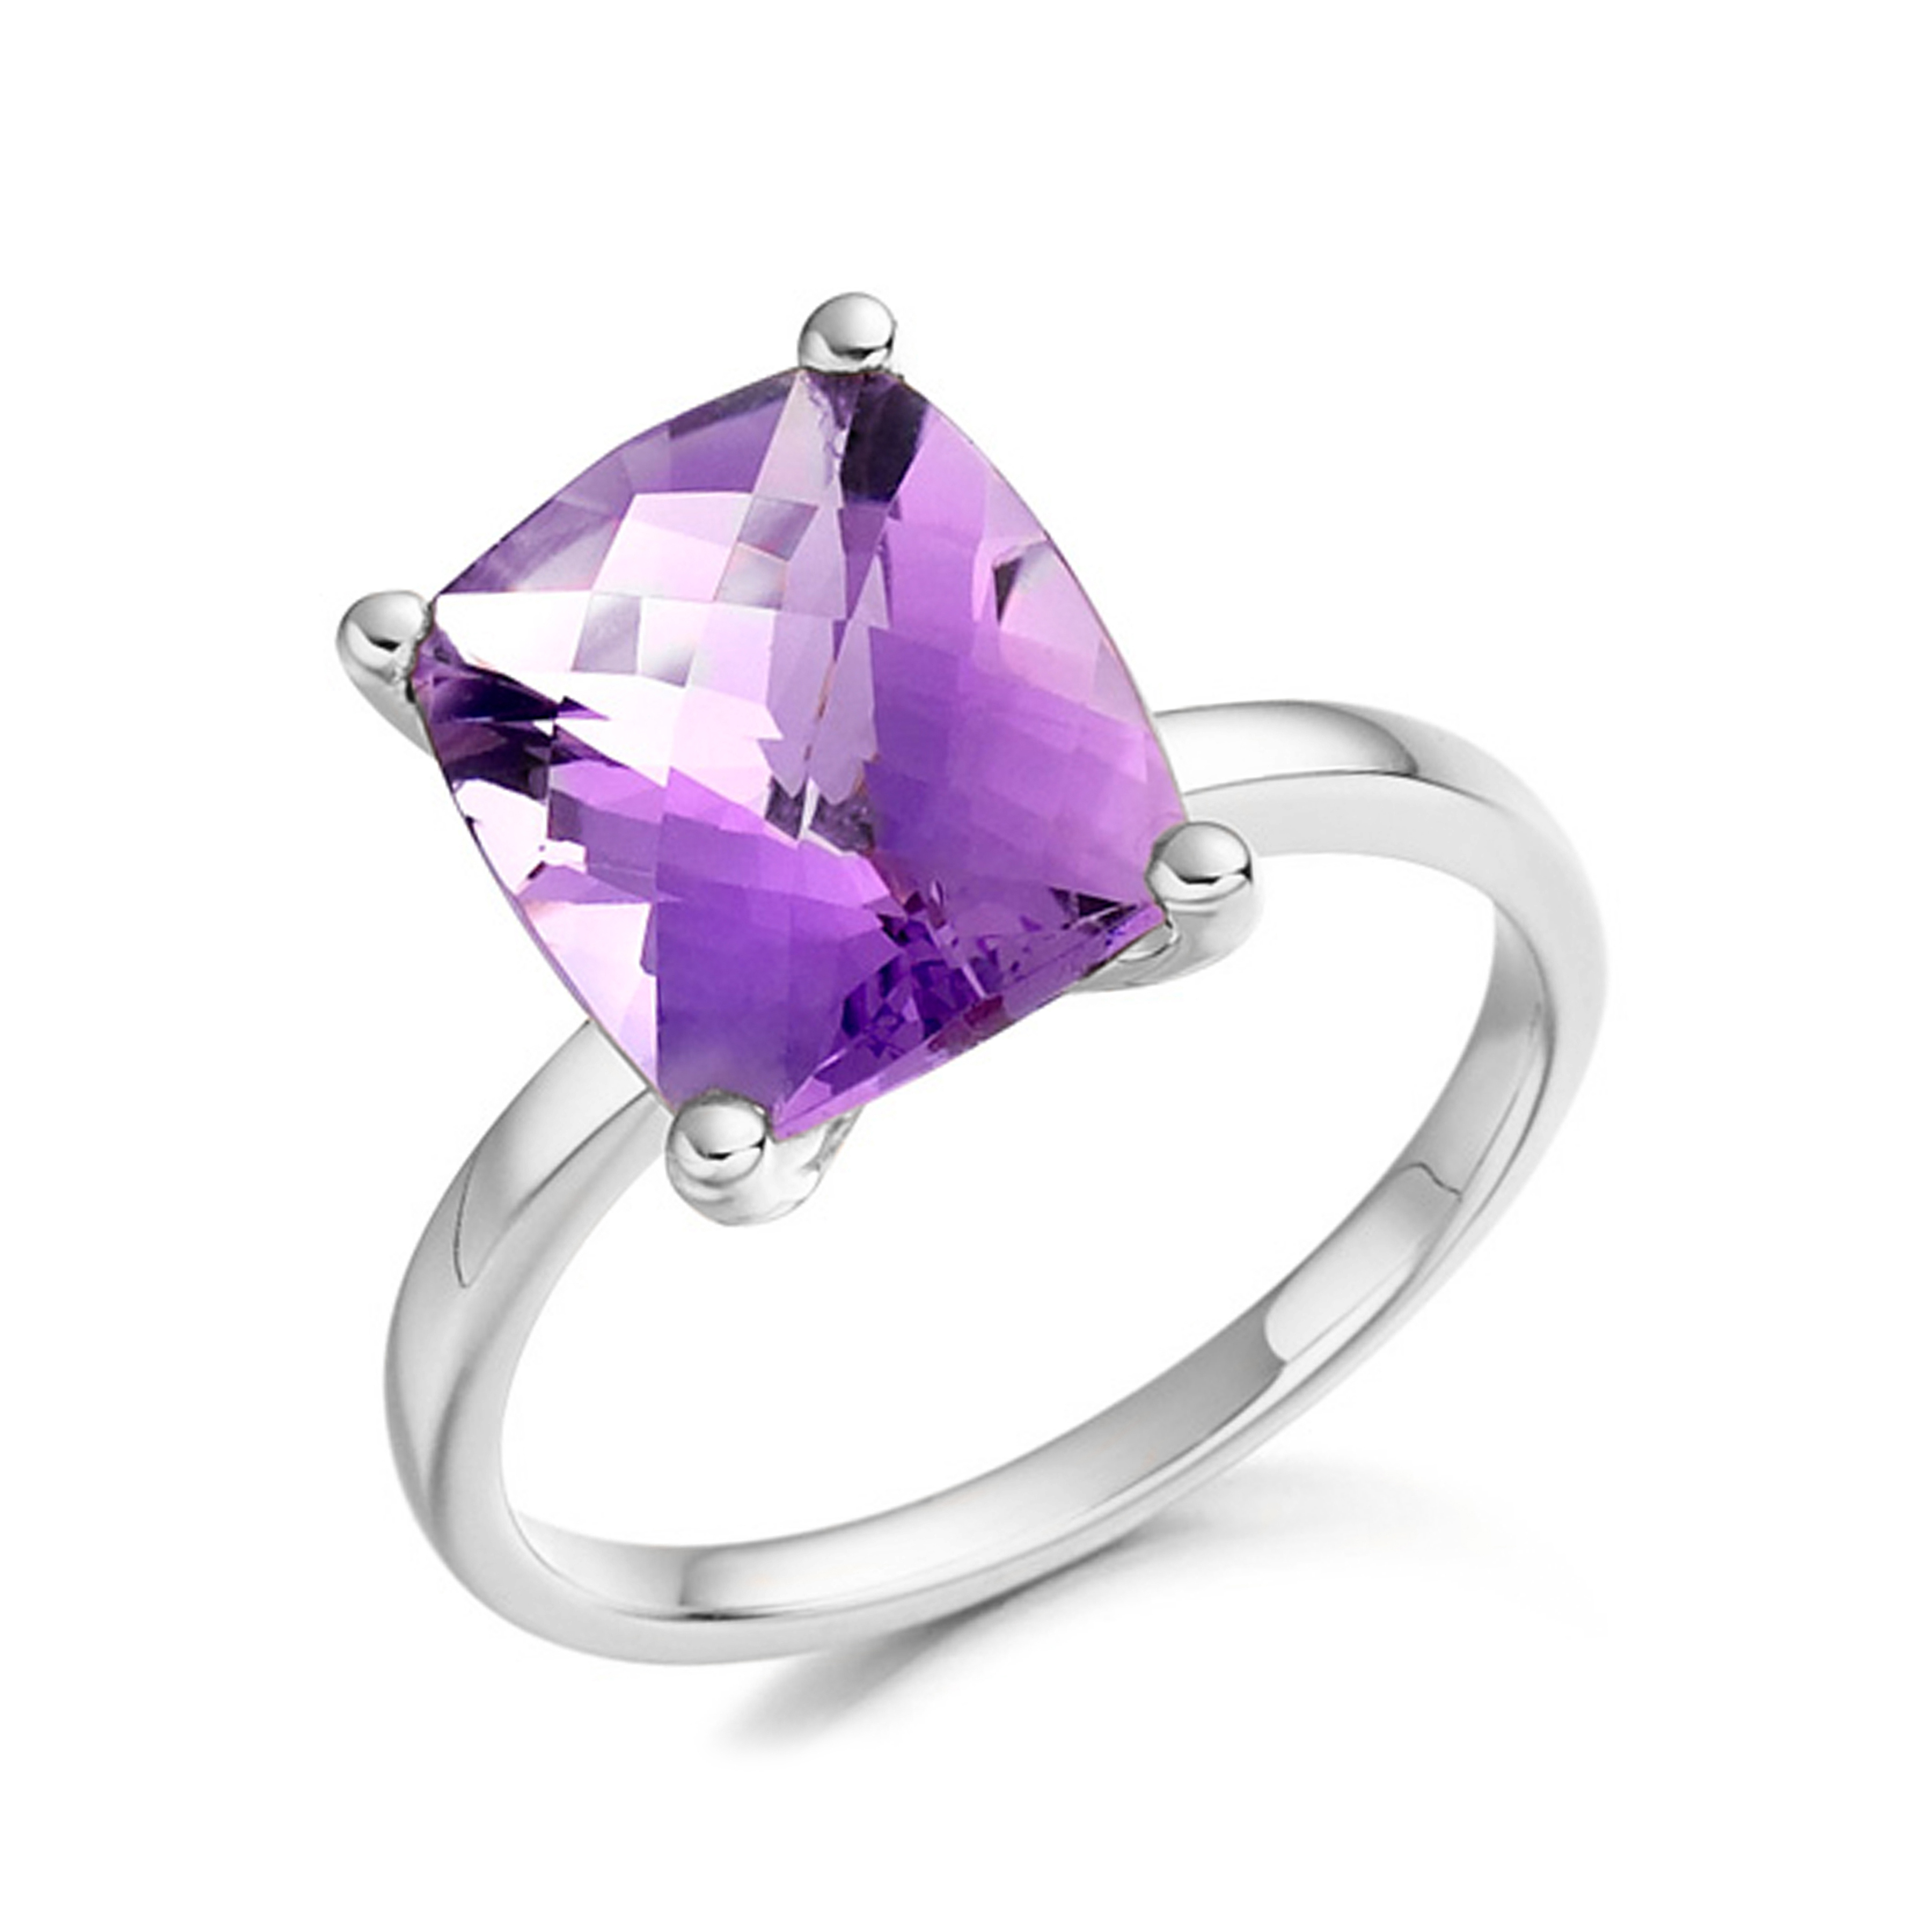 7X6mm Cushion Amethyst Solitaire Diamond And Gemstone Engagement Ring